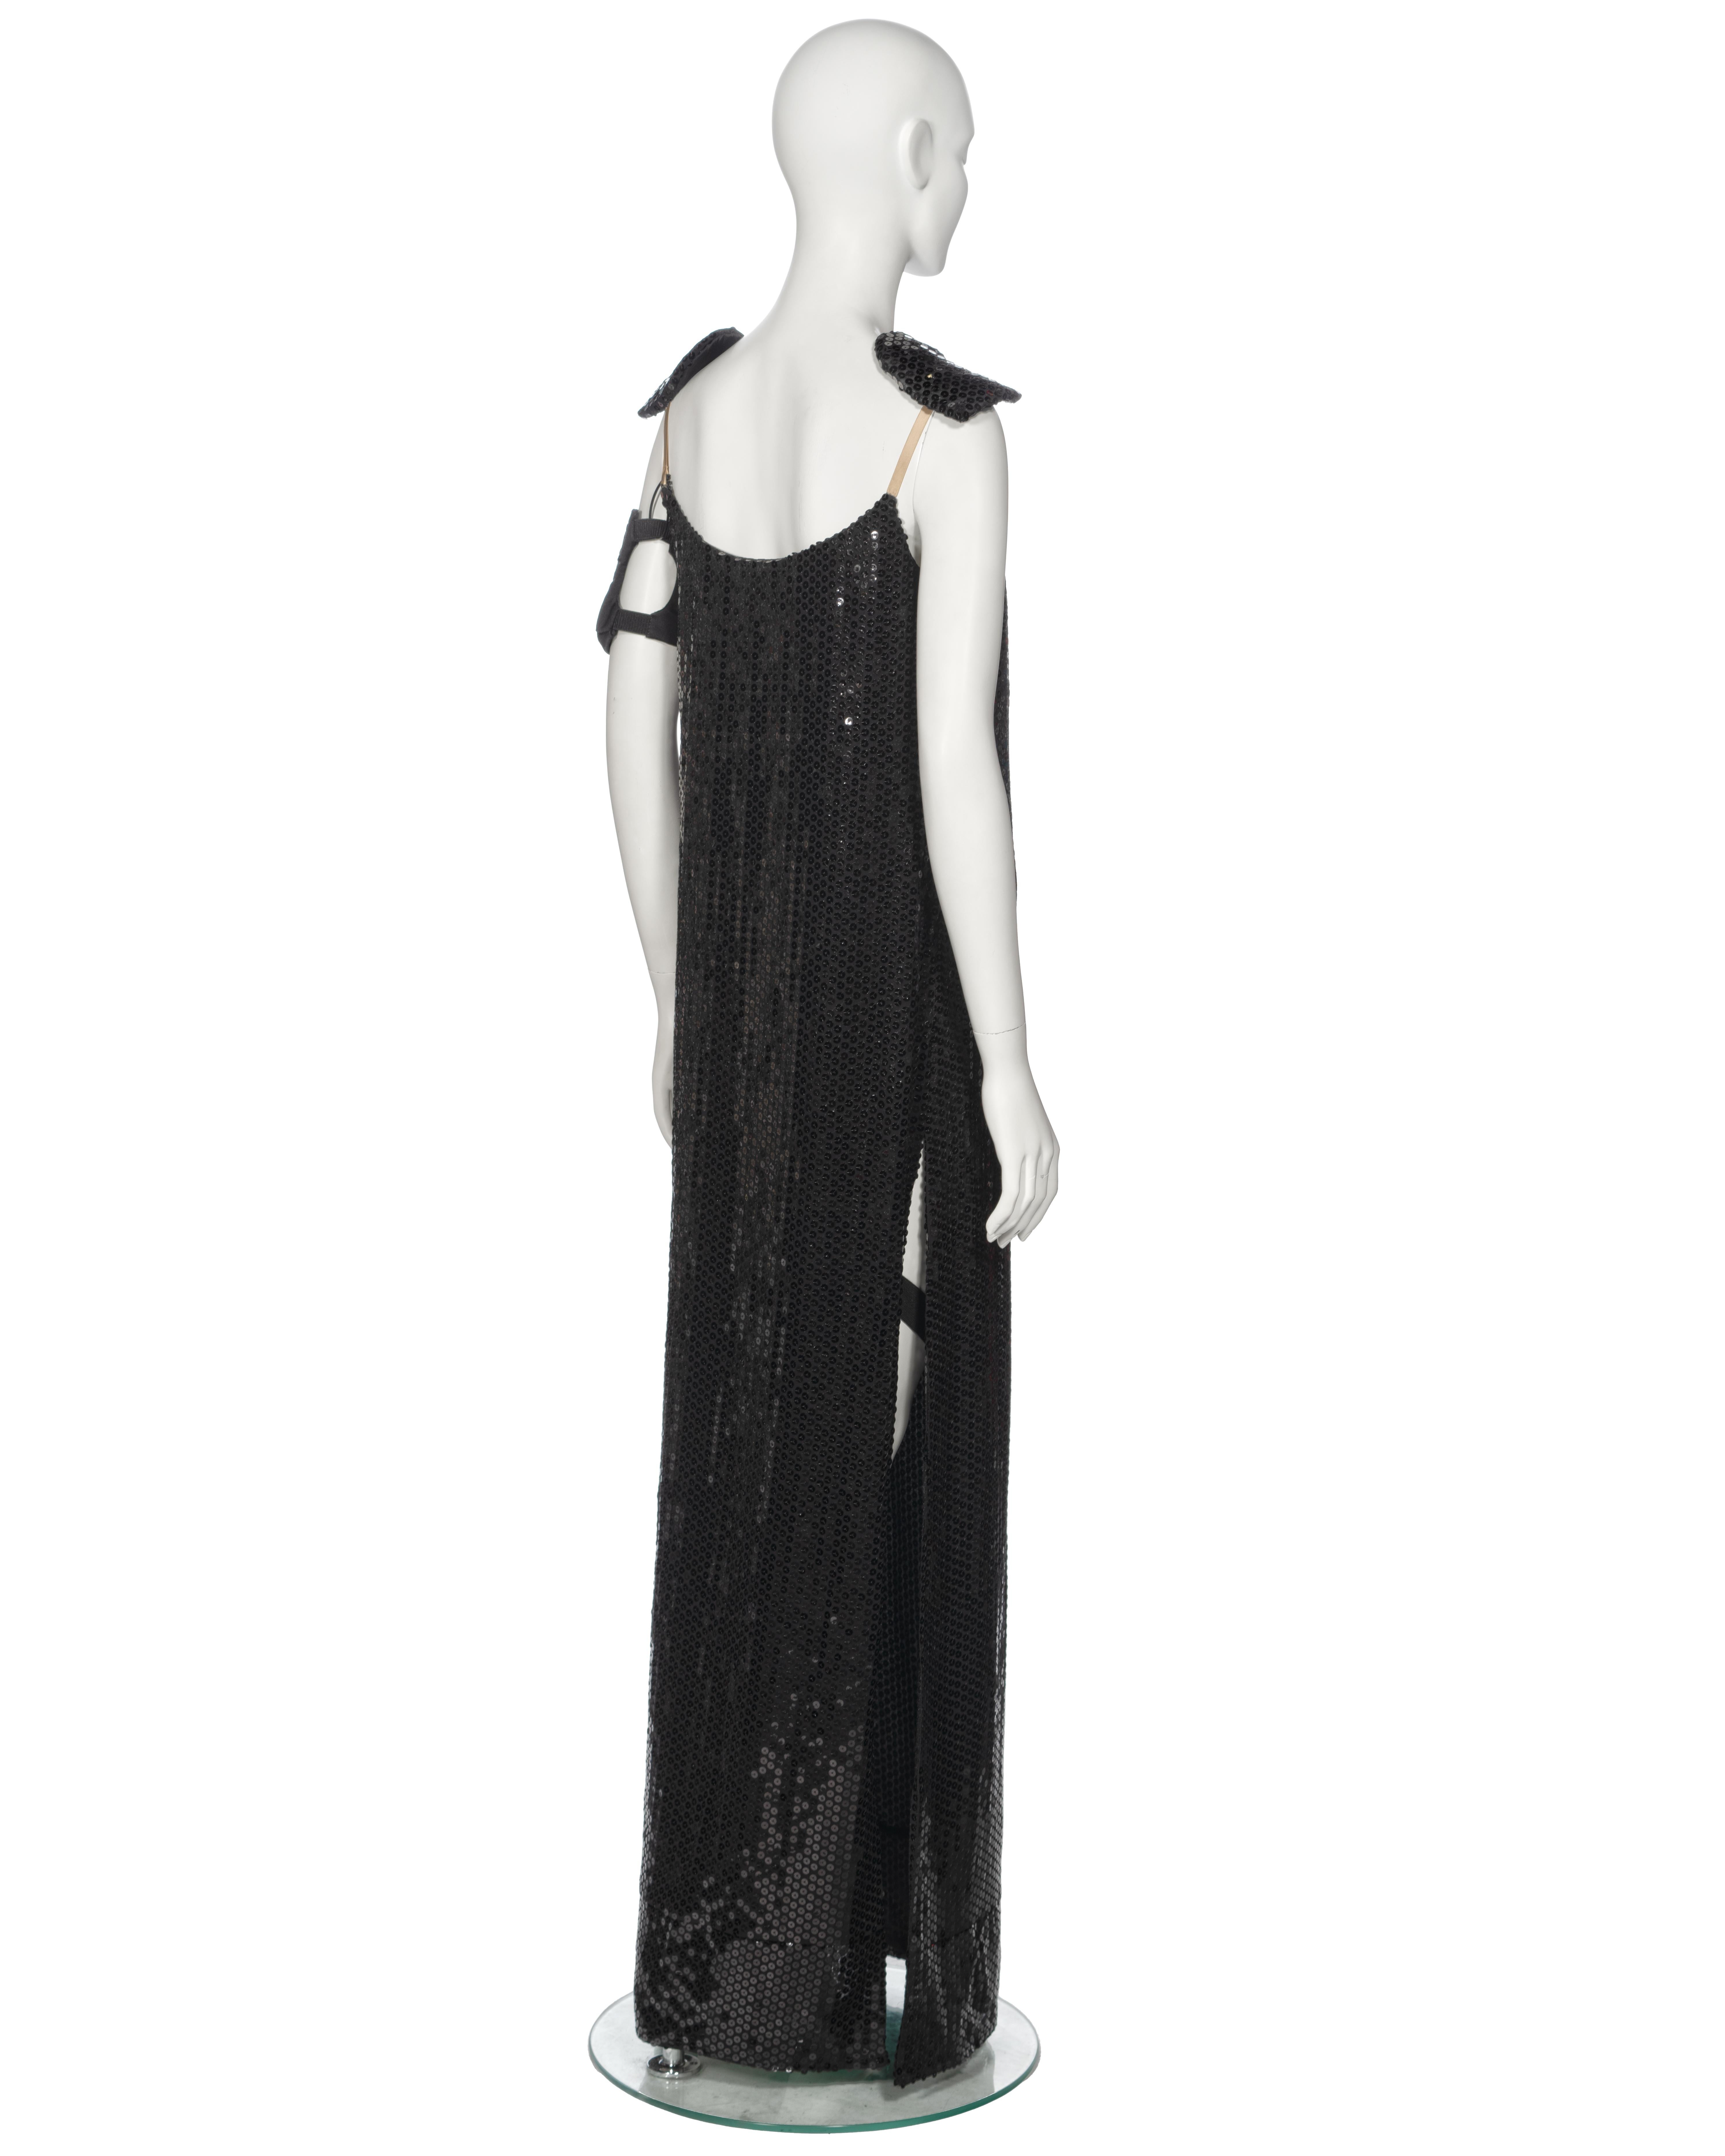 Helmut Lang Black Sequin Evening Dress With Armband, fw 1999 For Sale 8